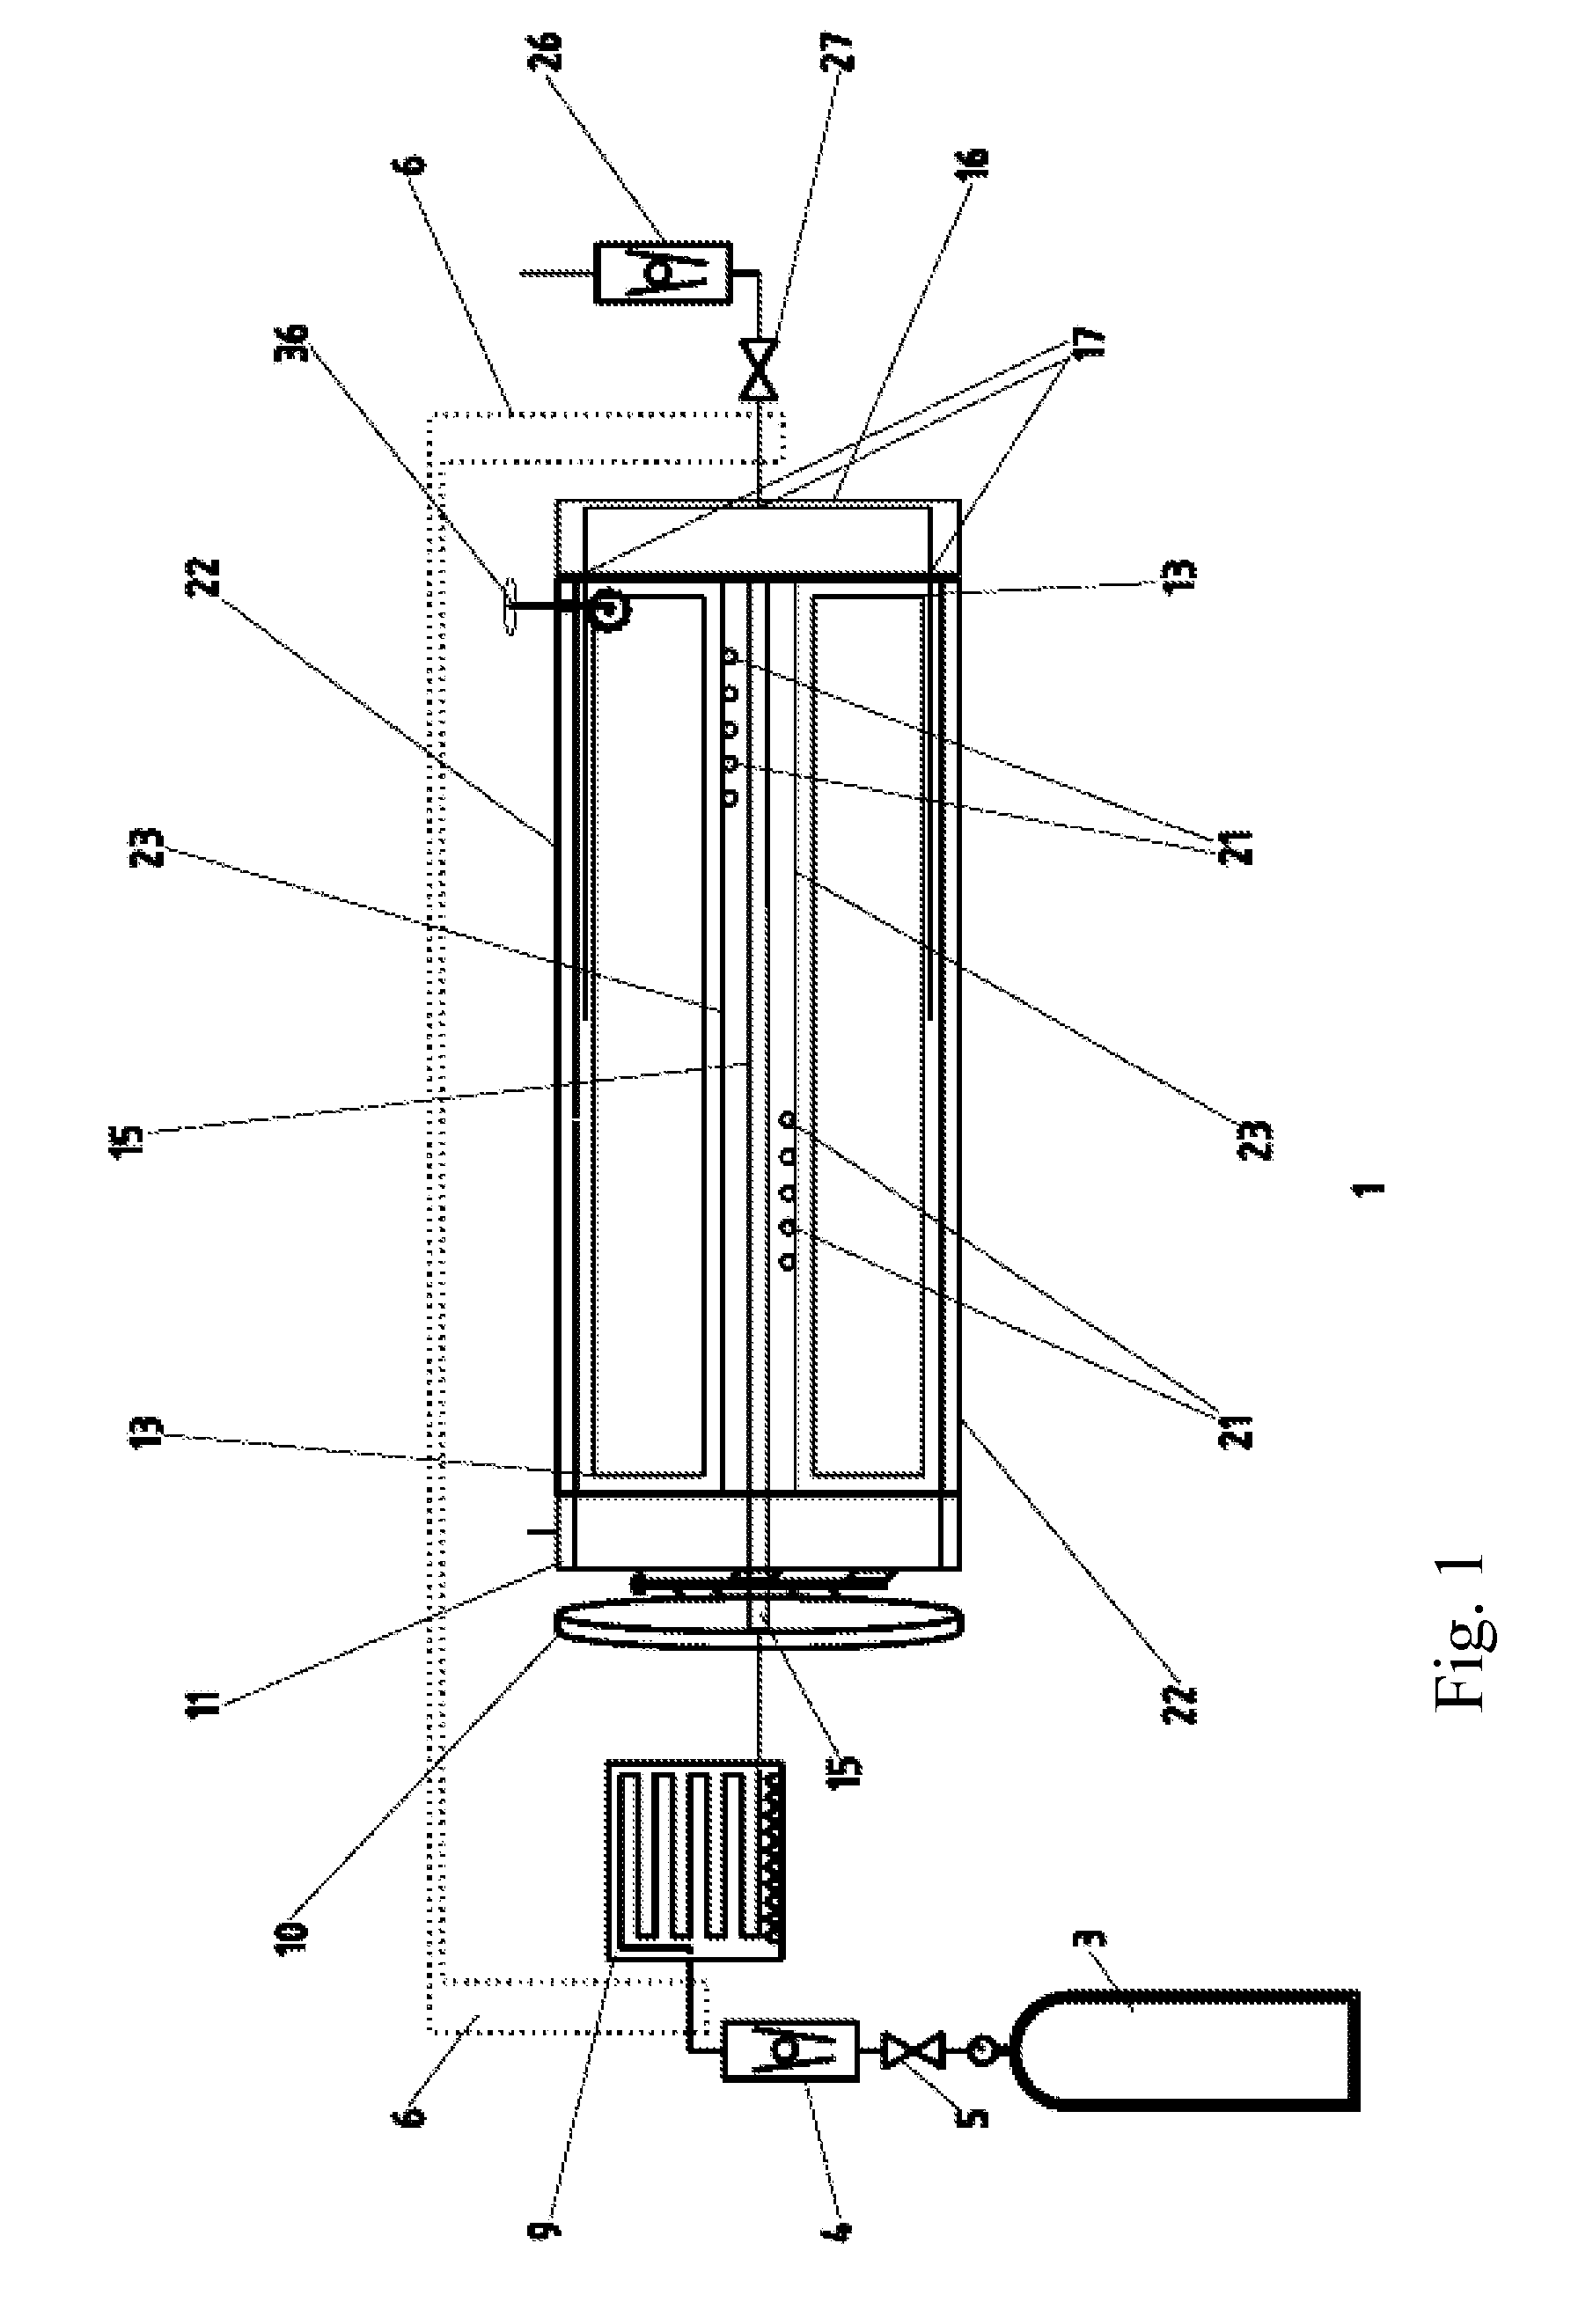 Method and apparatus for cooking low fat french fries